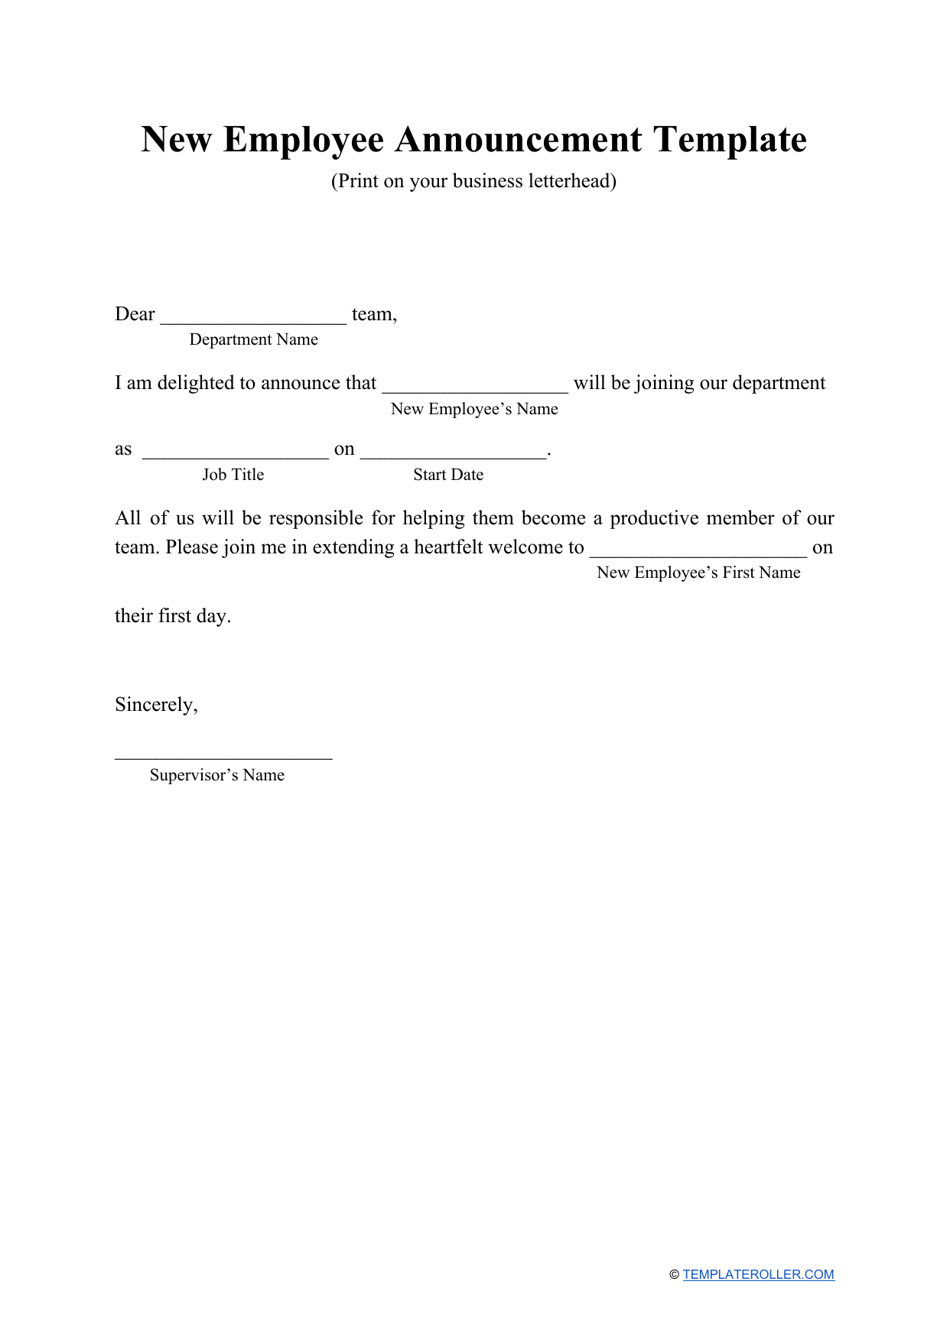 New Employee Announcement Template Fill Out Sign Online And Download PDF Templateroller